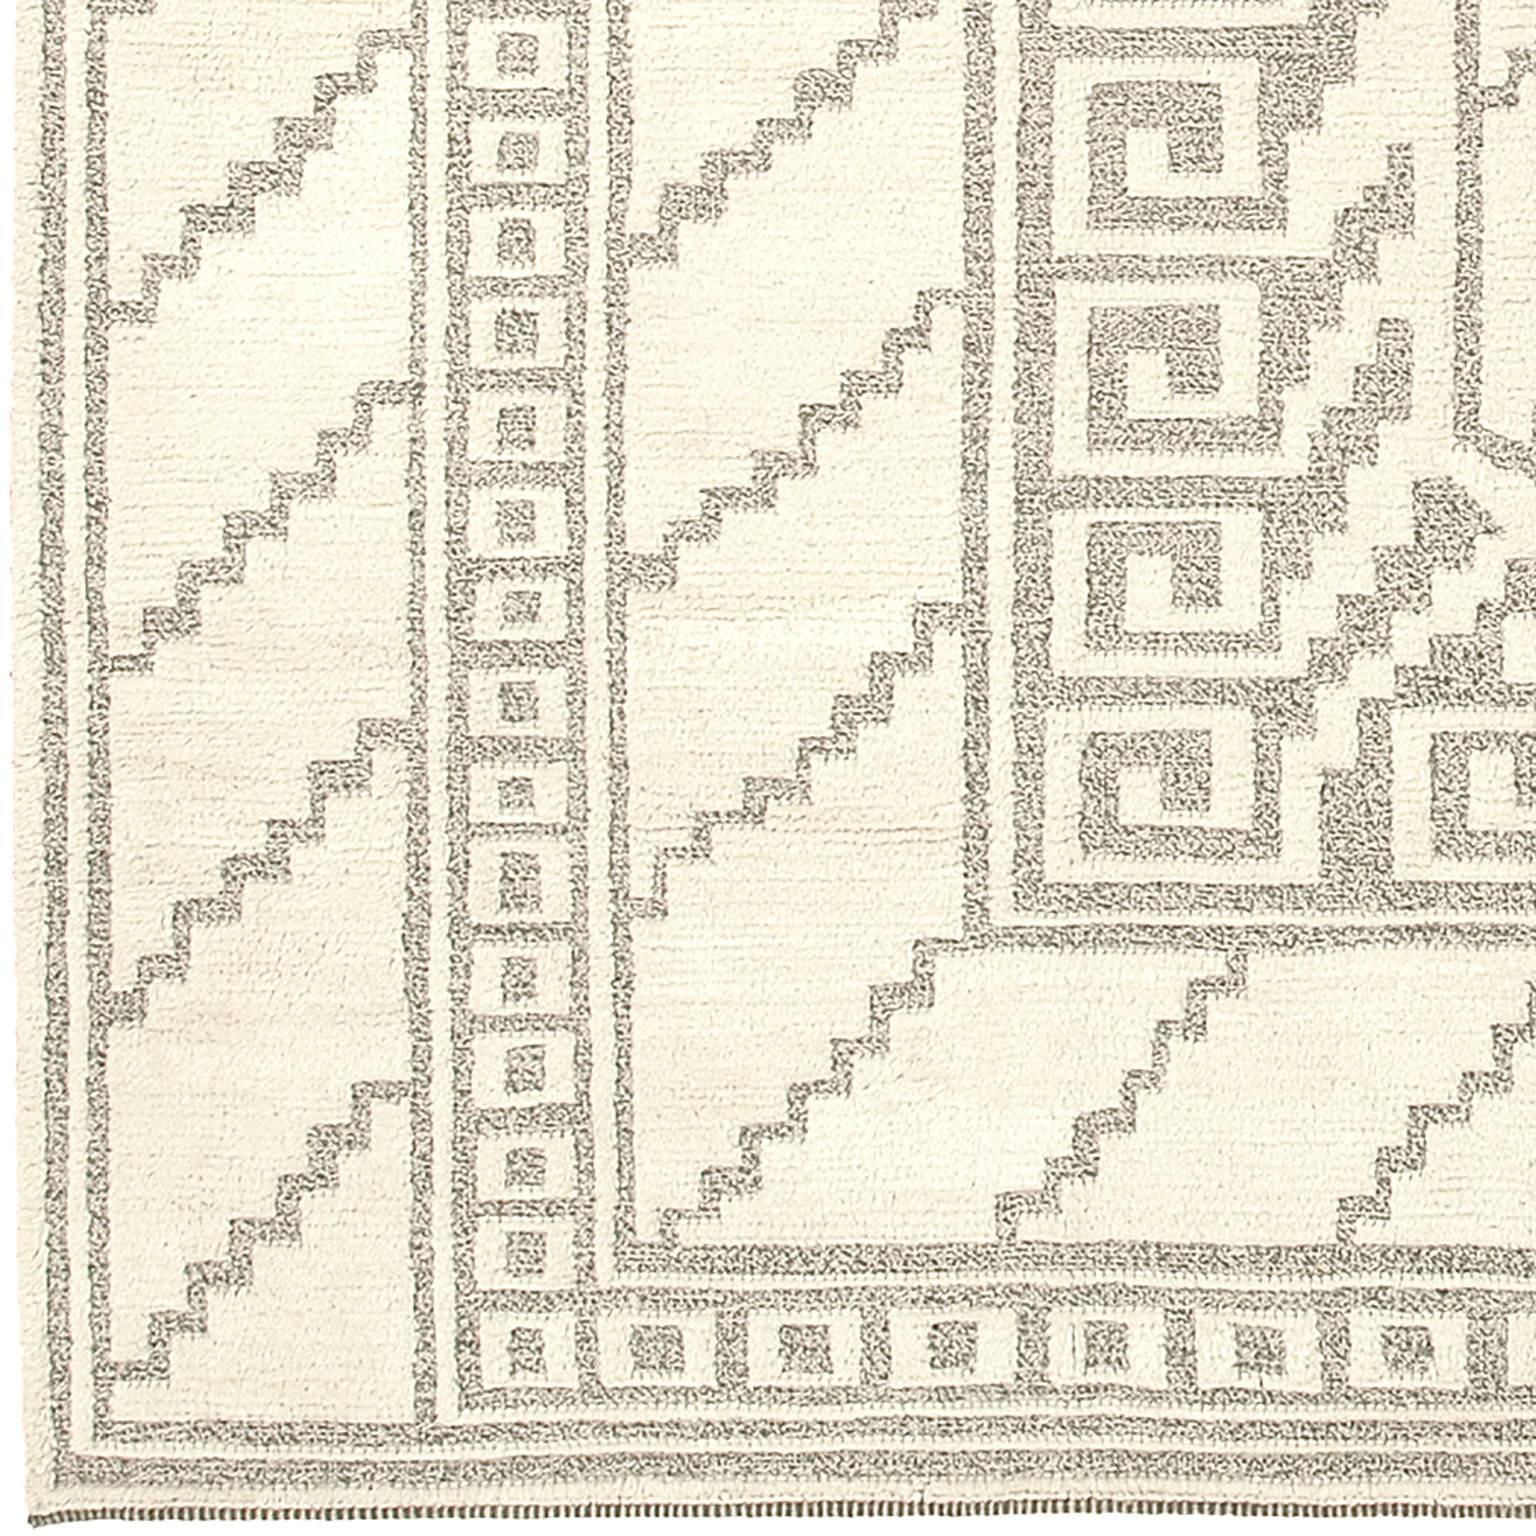 Contemporary 'Swedish Arch' Carpet
Fine Swedish pile and flat-weave technique.
100% wool woven on linen foundation. 